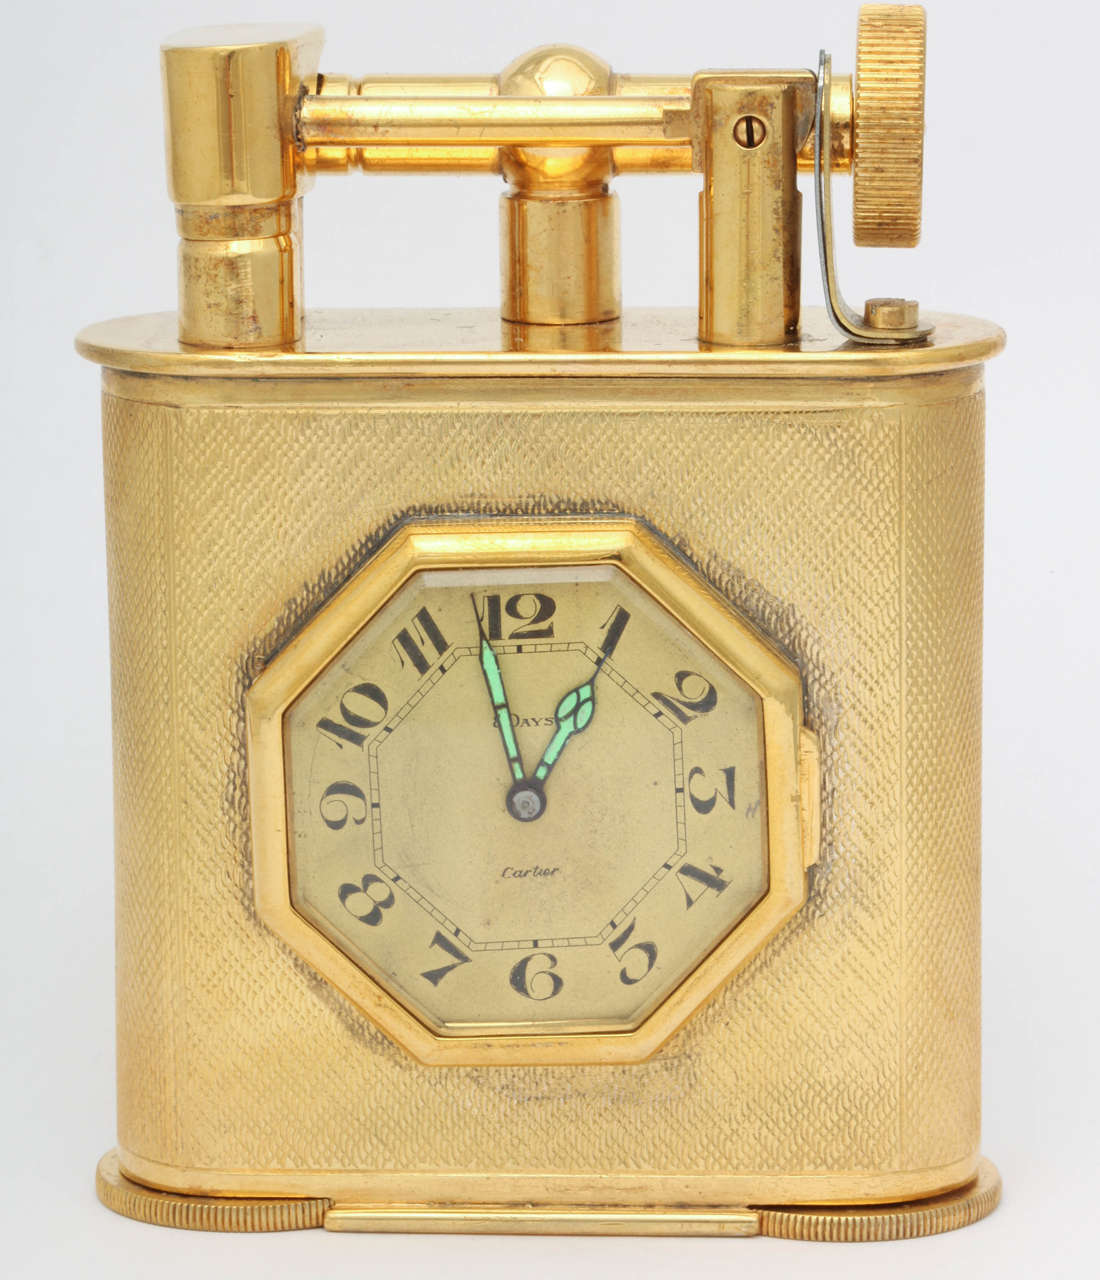 A stunning and exceptionally rare, English made, gold plated table lighter, made for and retailed by Cartier.  The lighter holds an eight day clock set in an octagonal frame in the center of the lighter's body.   The body is fully engine turned and